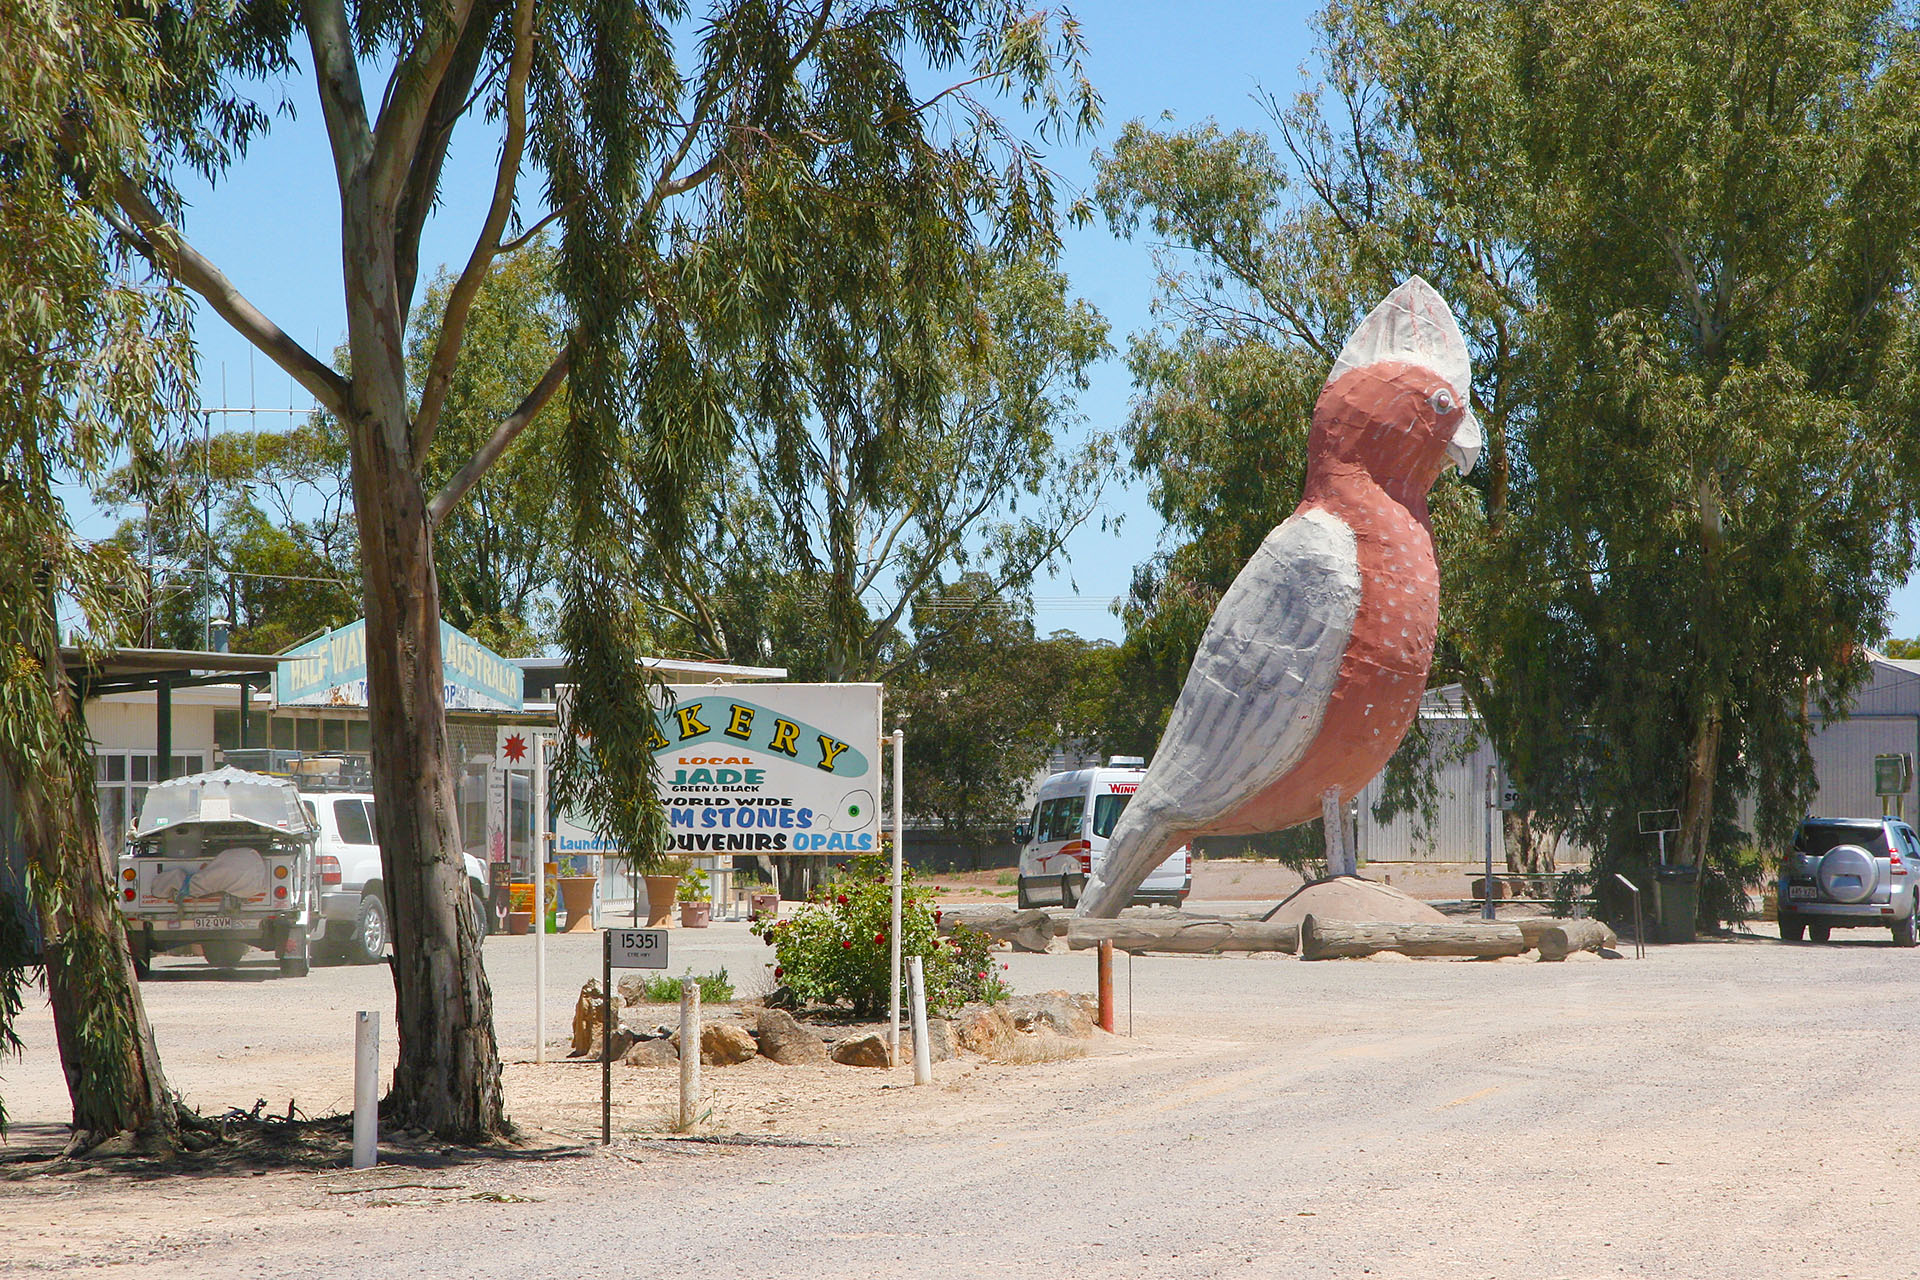 That's one big galah, all right.